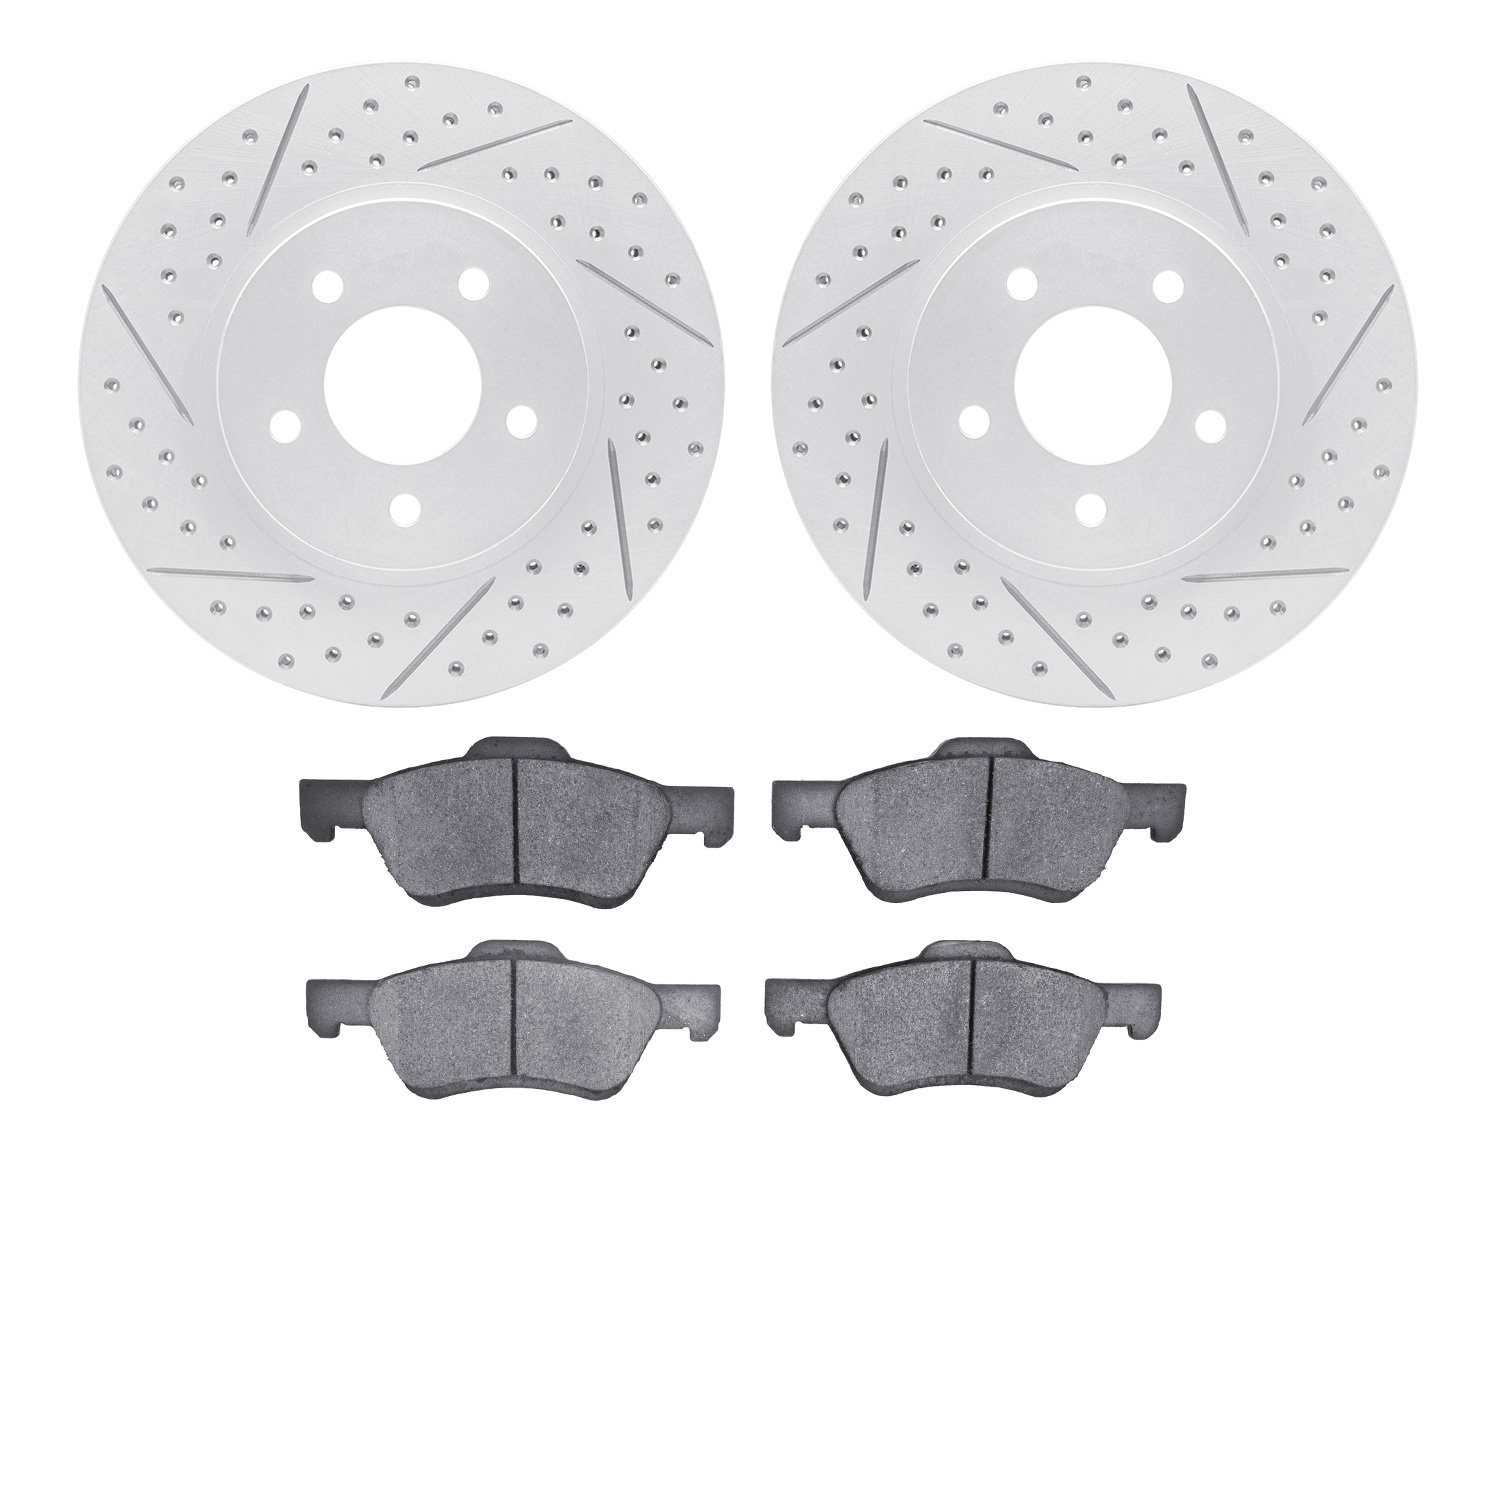 2502-54171 Geoperformance Drilled/Slotted Rotors w/5000 Advanced Brake Pads Kit, 2009-2012 Ford/Lincoln/Mercury/Mazda, Position: